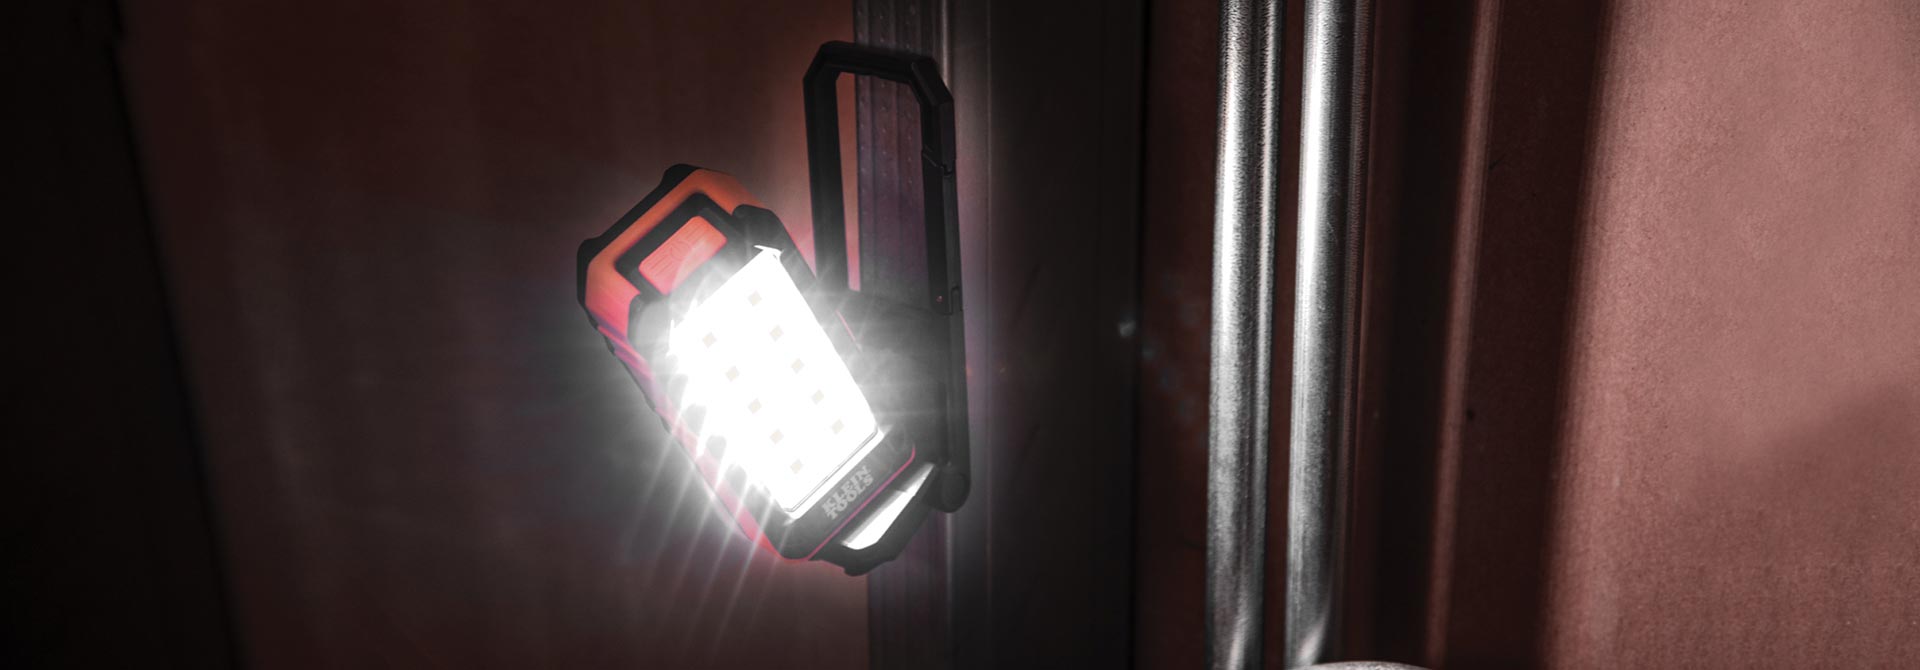 RECHARGEABLE
PERSONAL
WORKLIGHT